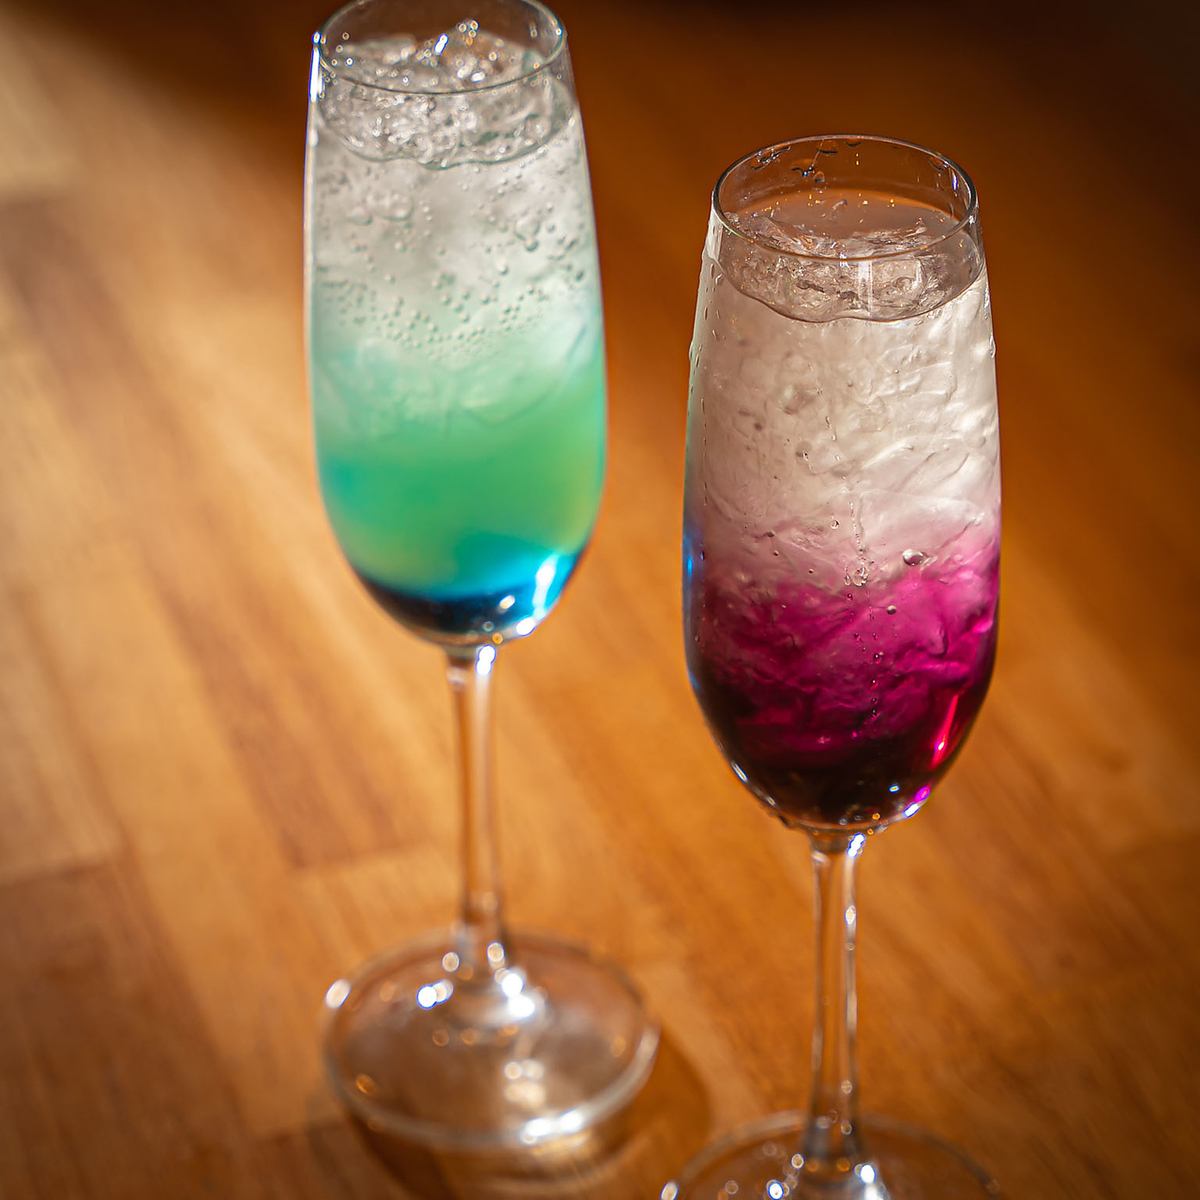 Even though it's an izakaya, it's a special moment. Special anniversary cocktails are also available.